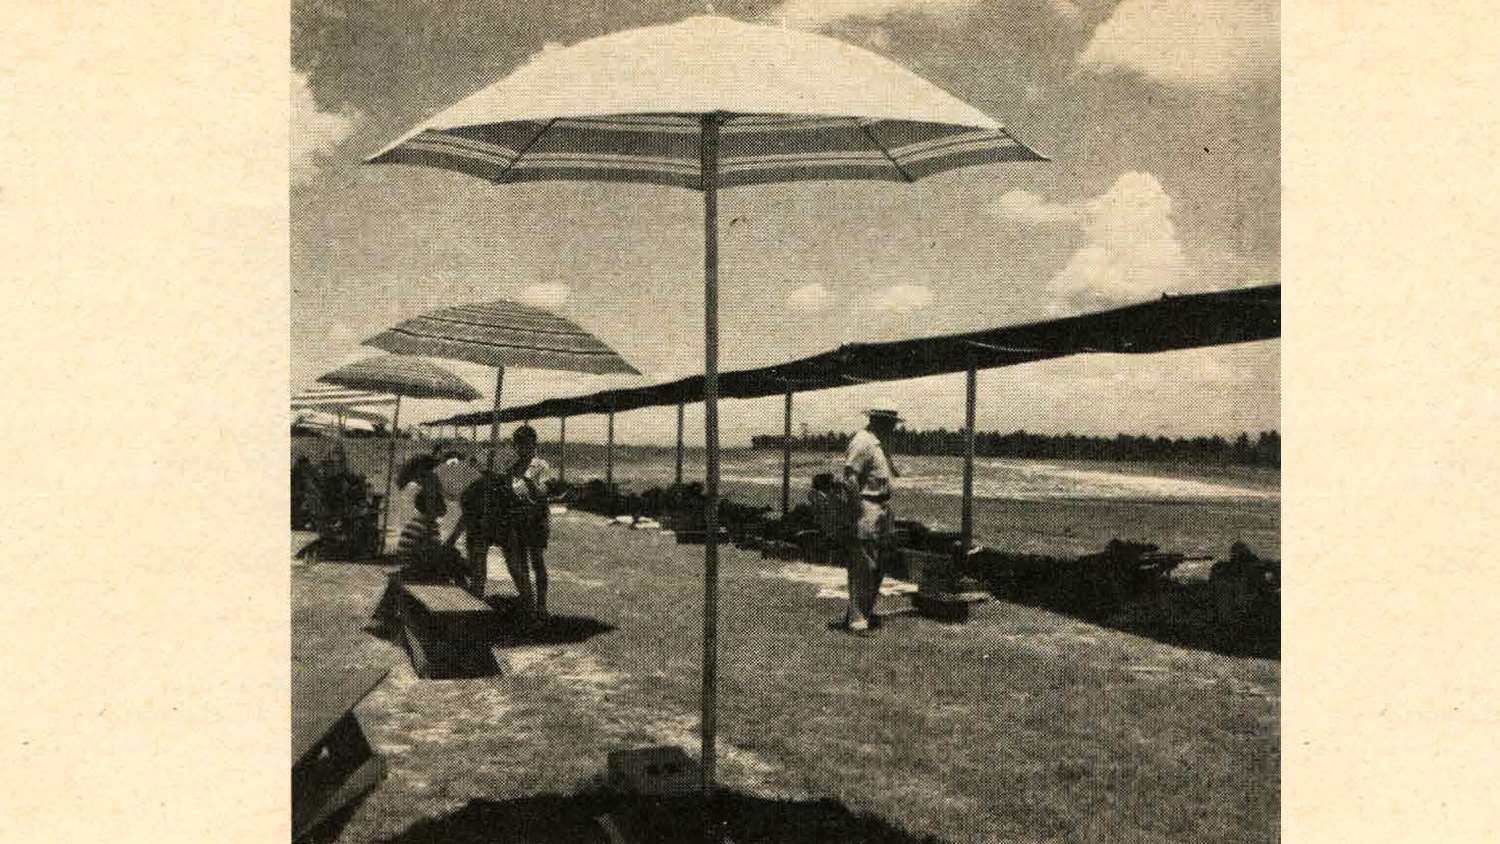 The original caption to this photo from the October 1952 issue of American Rifleman: &quot;Brightly colored sun umbrellas behind the smallbore firing line gave Jacksonville National added gayety.&quot;